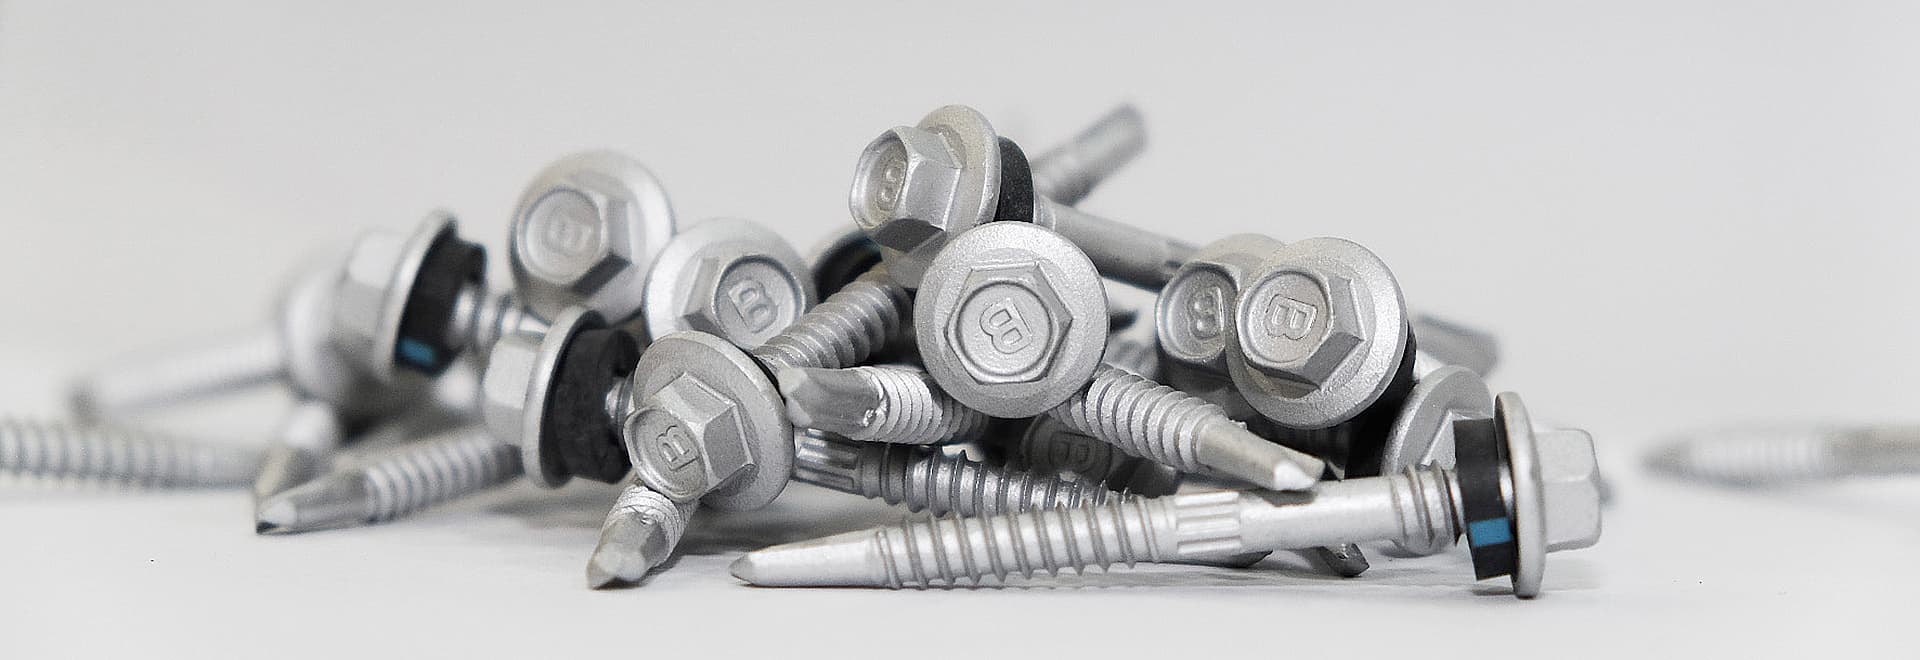 SLG Fasteners Asia's best Roofing Fastener company